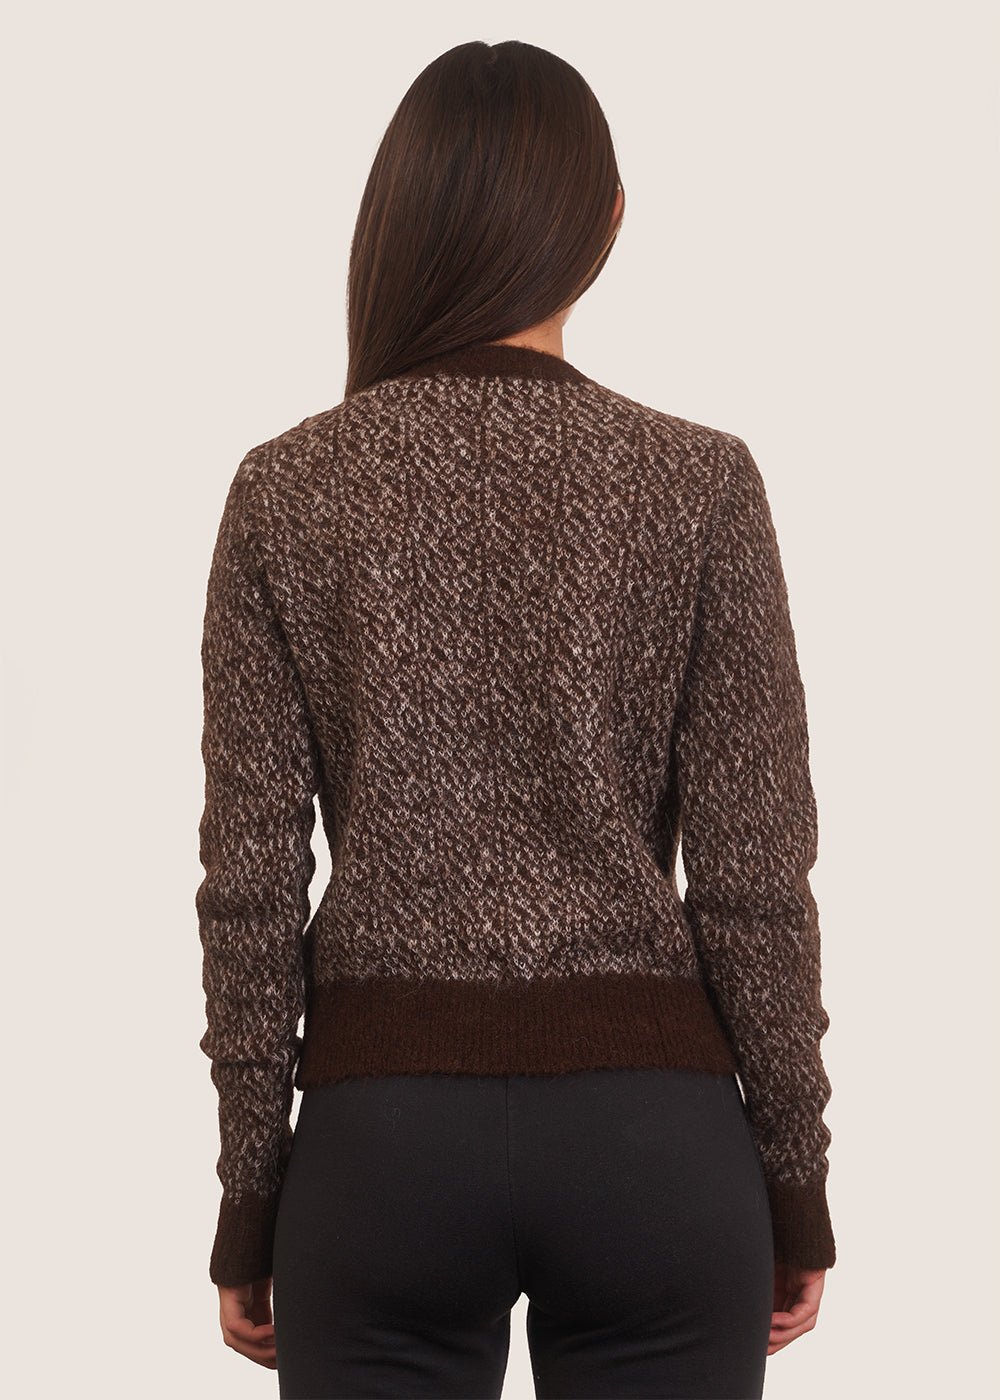 Paloma Wool Dark Brown Paufito Sweater - New Classics Studios Sustainable Ethical Fashion Canada